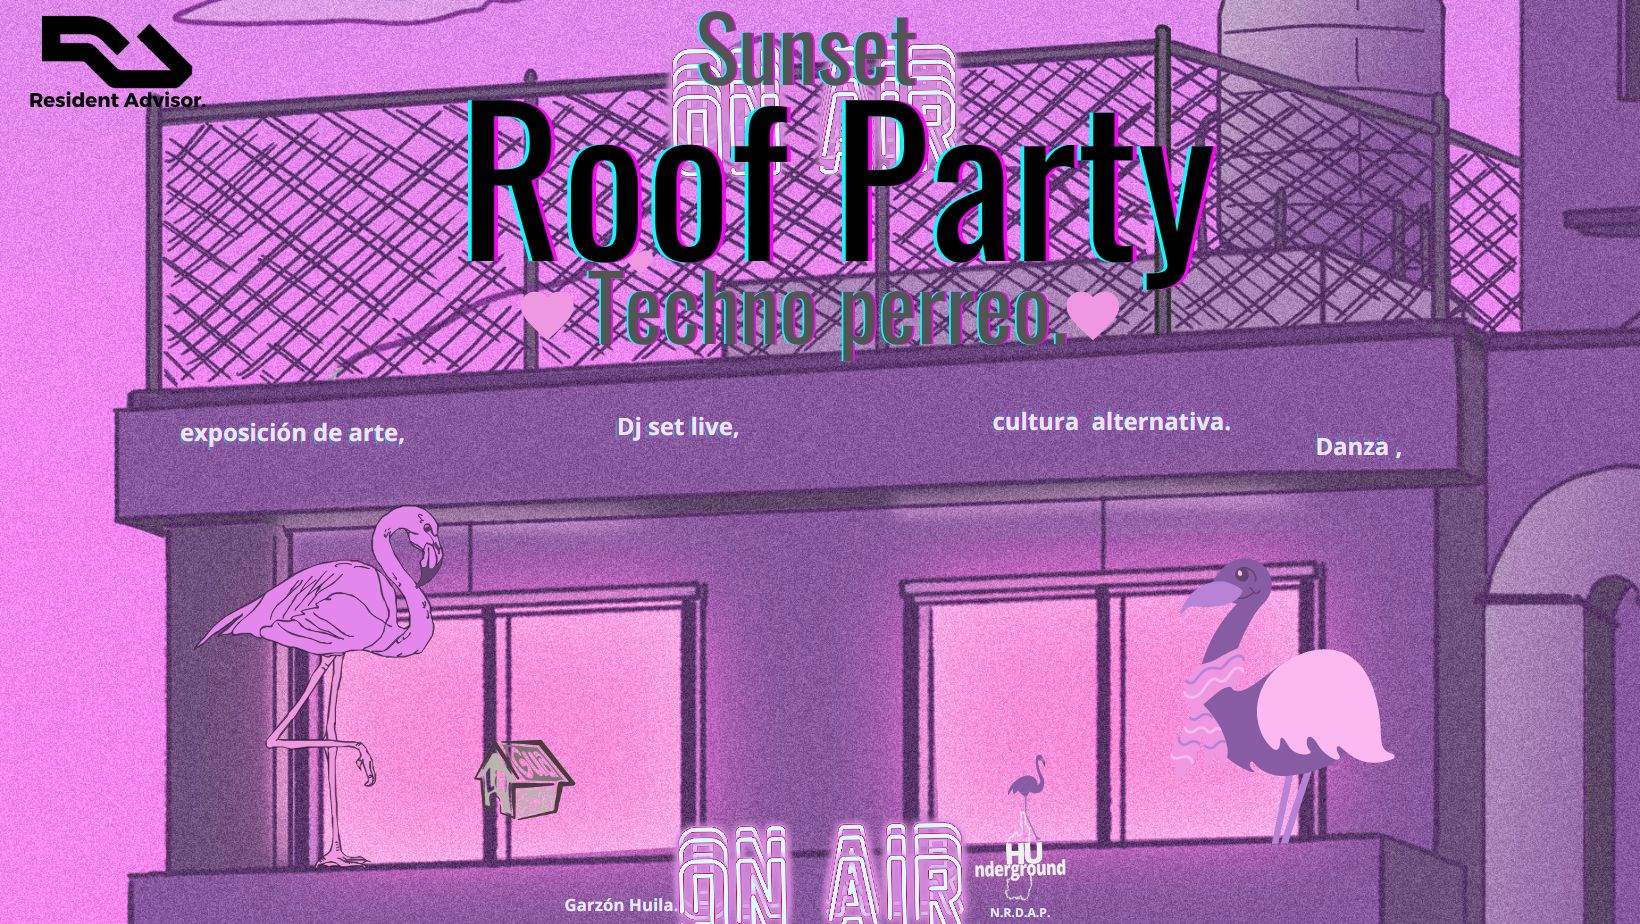 Sunset Roof Party - フライヤー裏